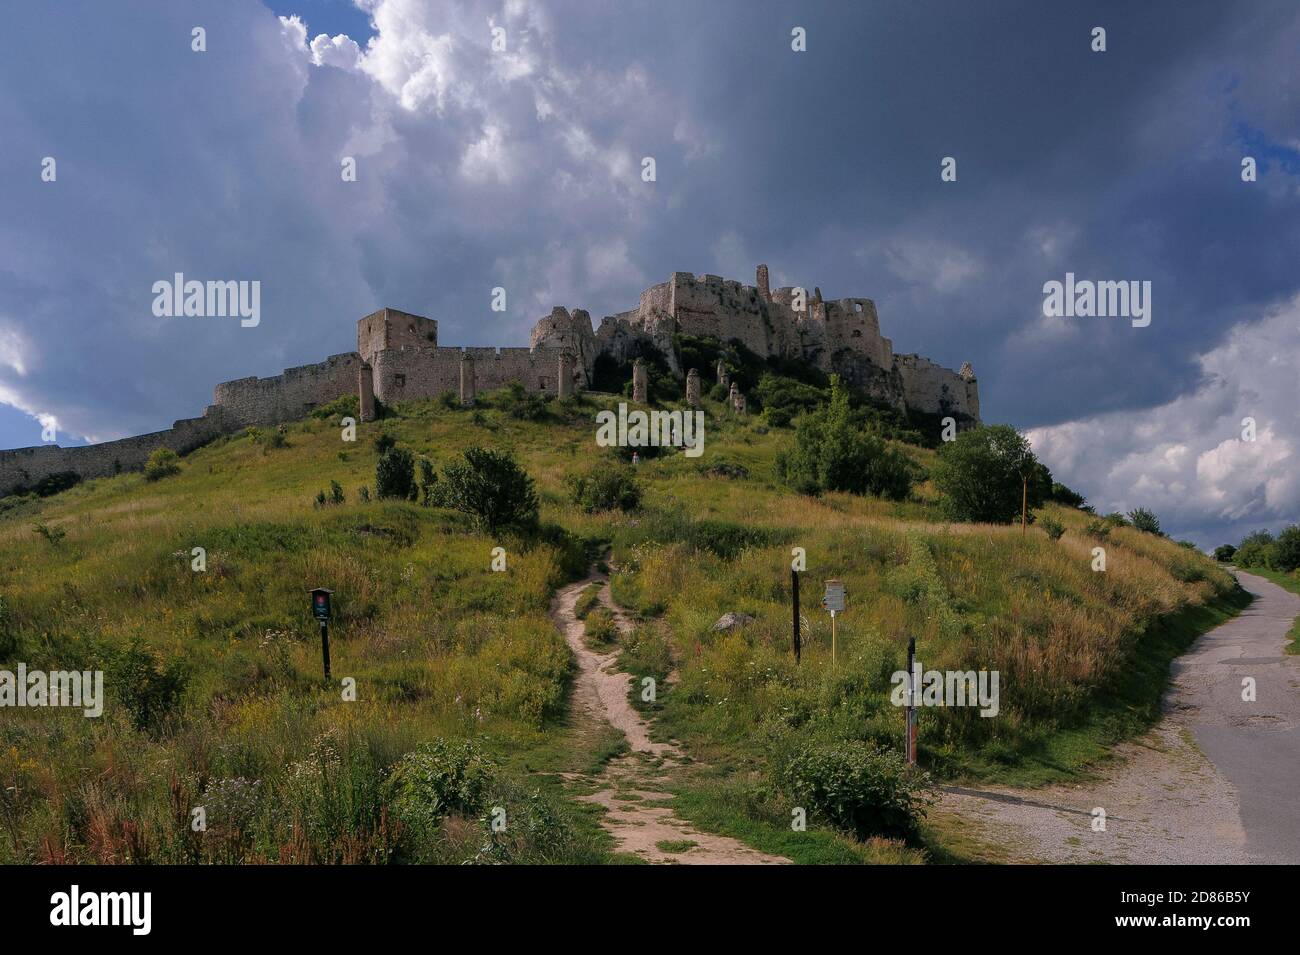 The mighty stronghold of Spiš Castle (Spišský hrad), founded in the 1200s by Hungarian kings and now in the Košice Region of Slovakia.  It successfully repelled a Tartar siege in 1241 and grew to become Central Europe’s largest fortress complex.  Spiš was abandoned after a catastrophic fire in 1780, but a thorough restoration programme, launched in 1969, led to both the castle and its environs achieving UNESCO World Heritage Site status in 1993. Stock Photo